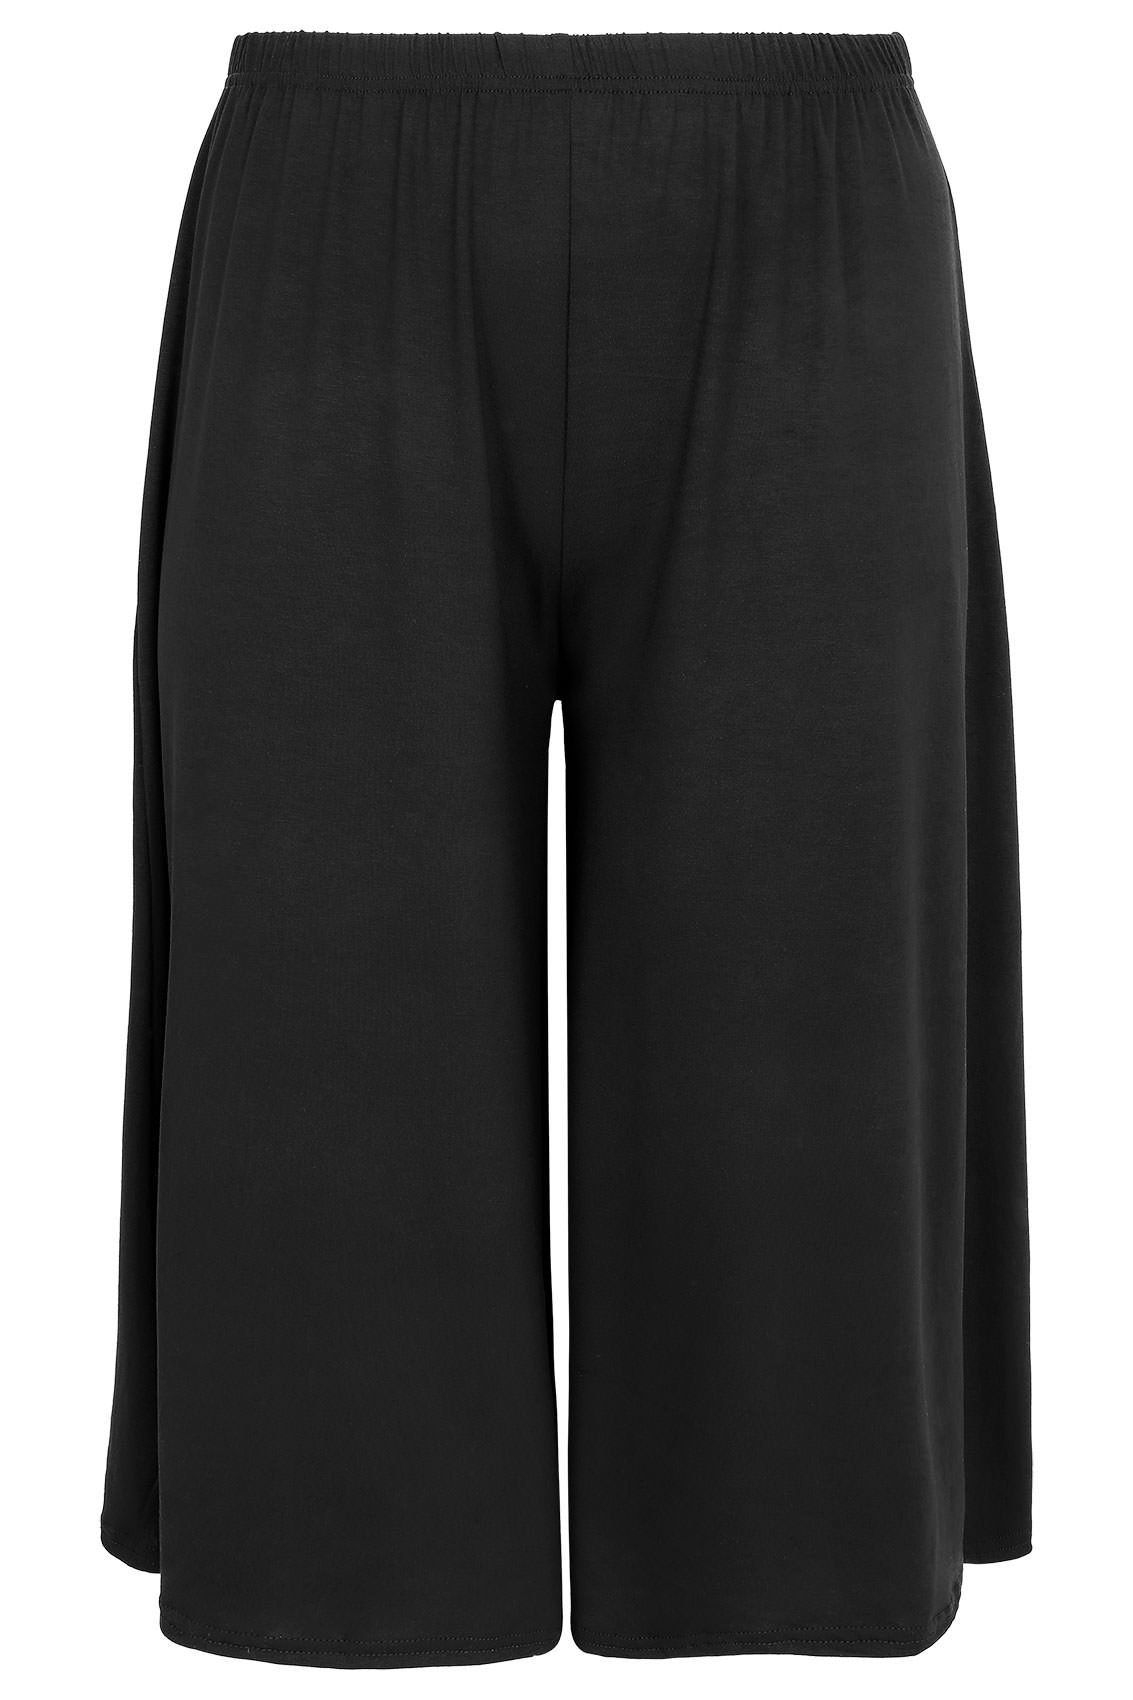 Black Jersey Culottes, Plus size 16 to 36